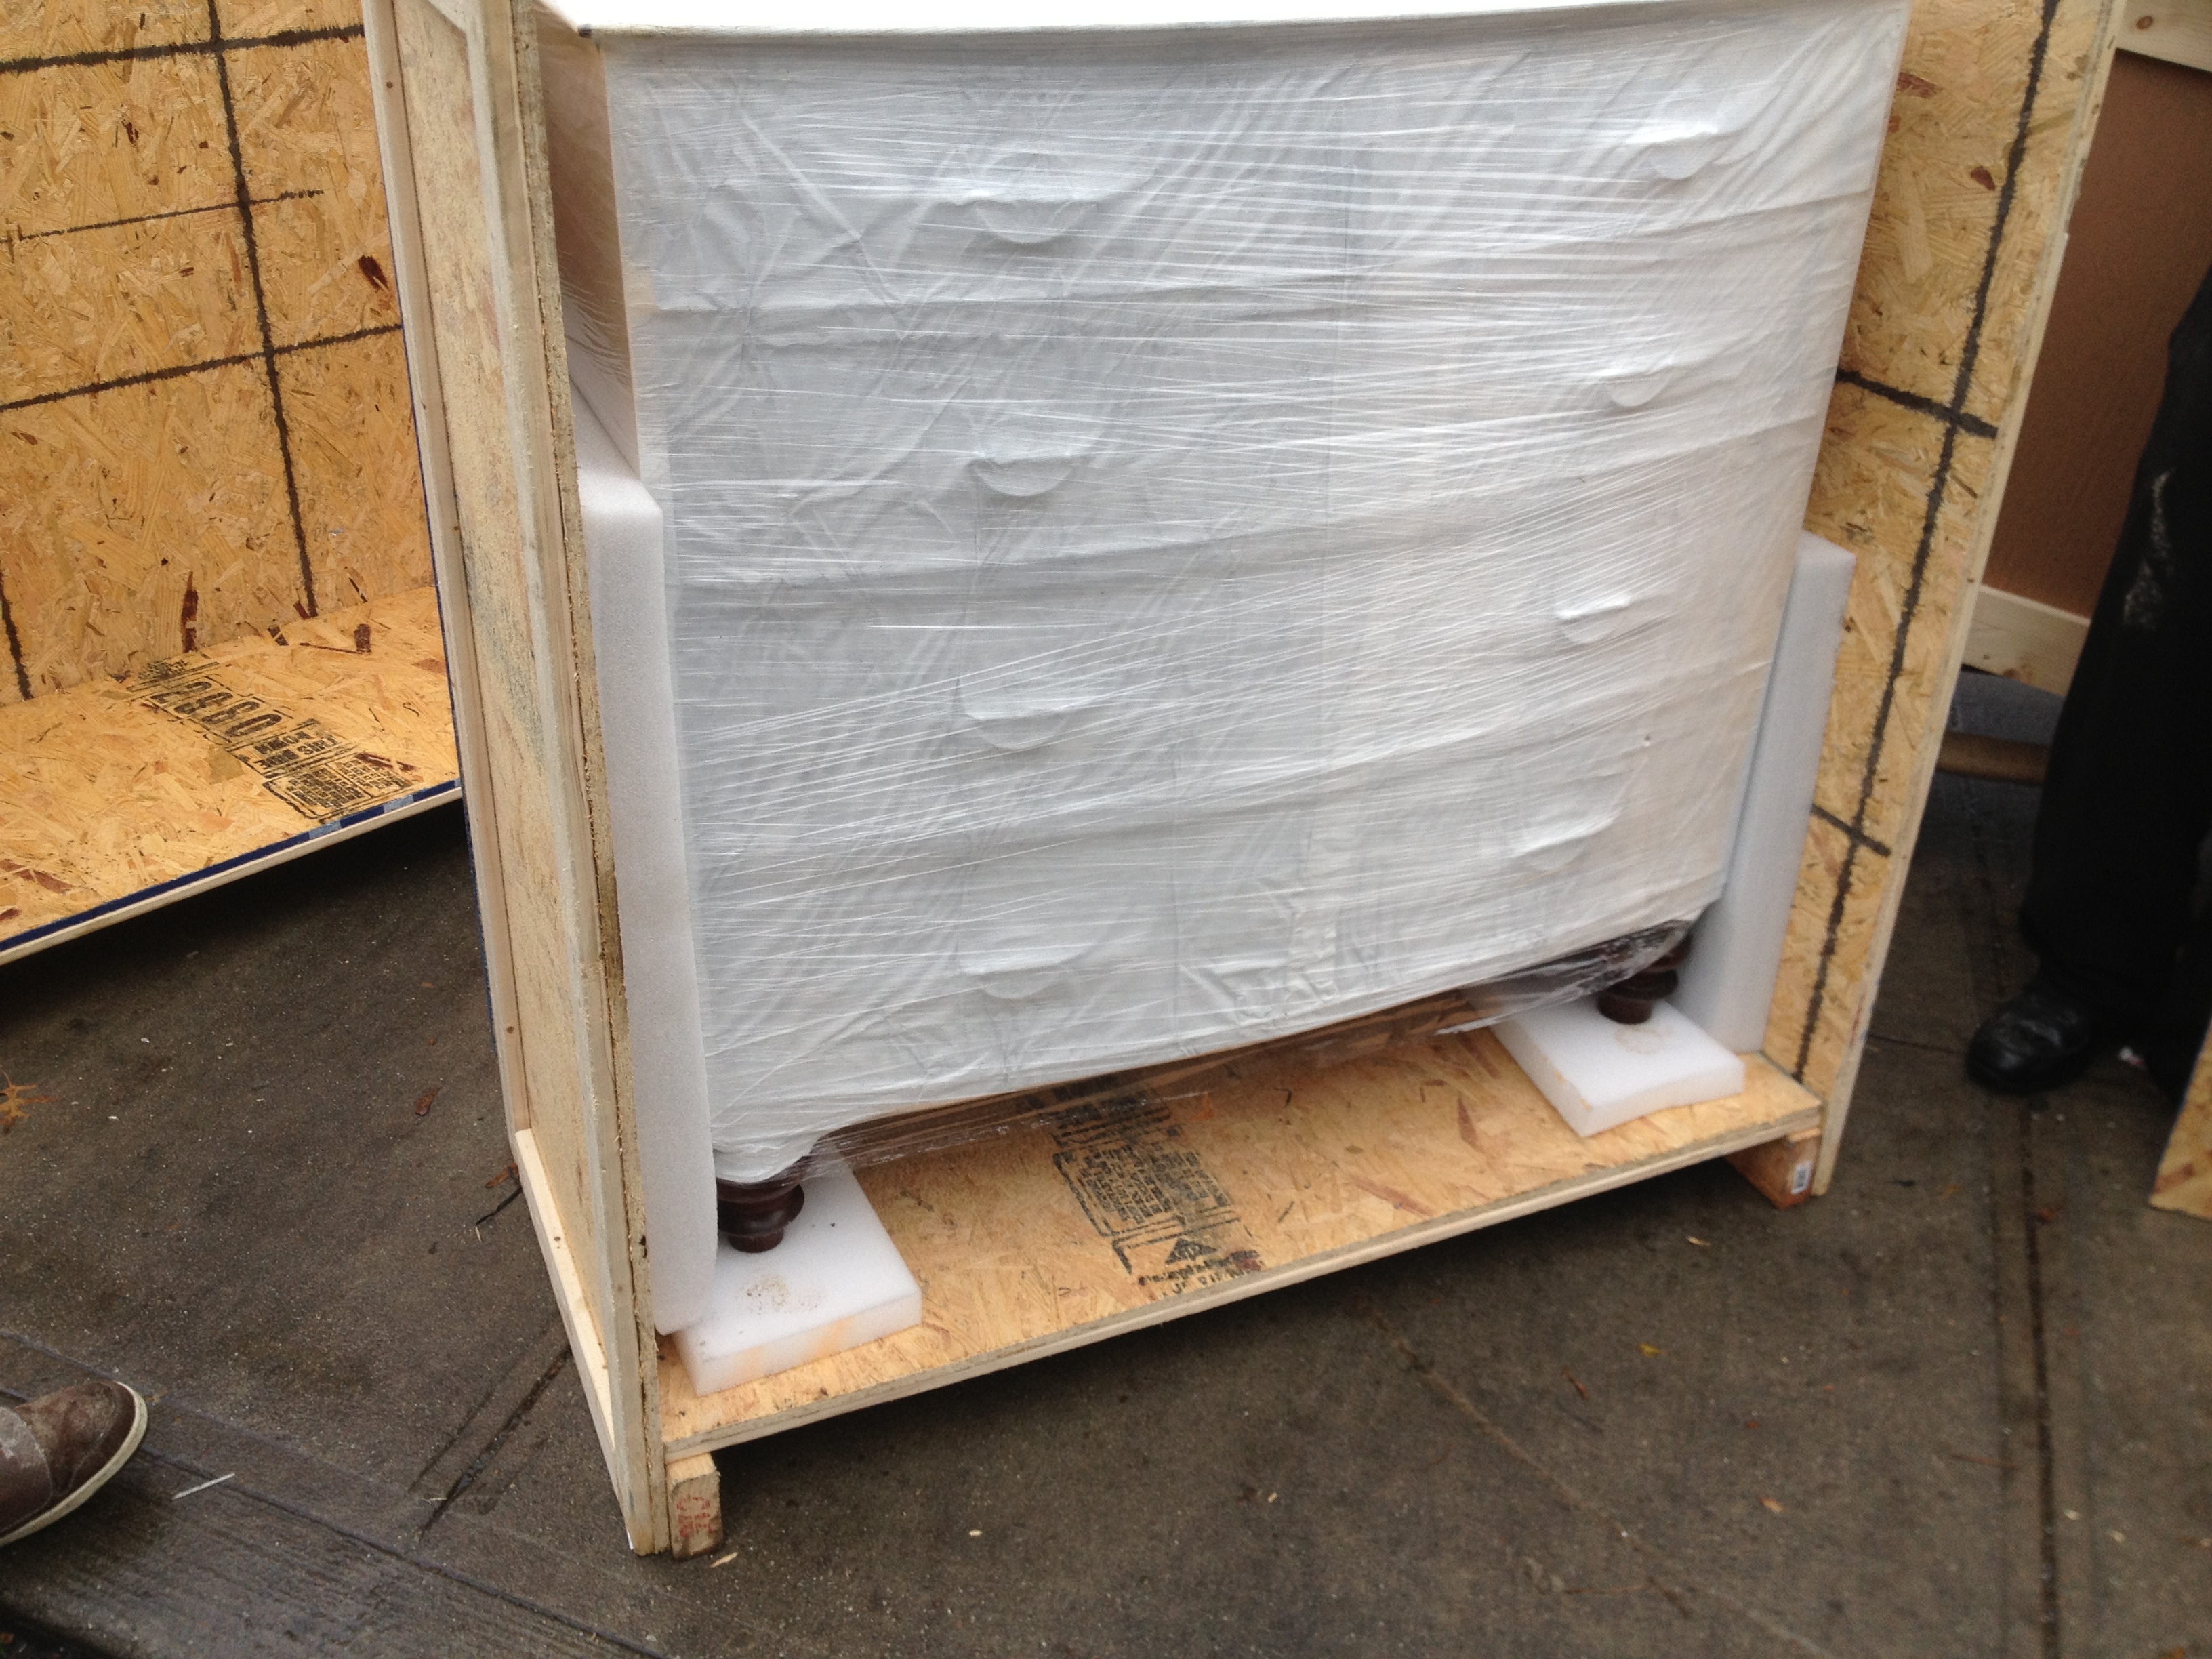 International wooden crates - Packing Service Inc